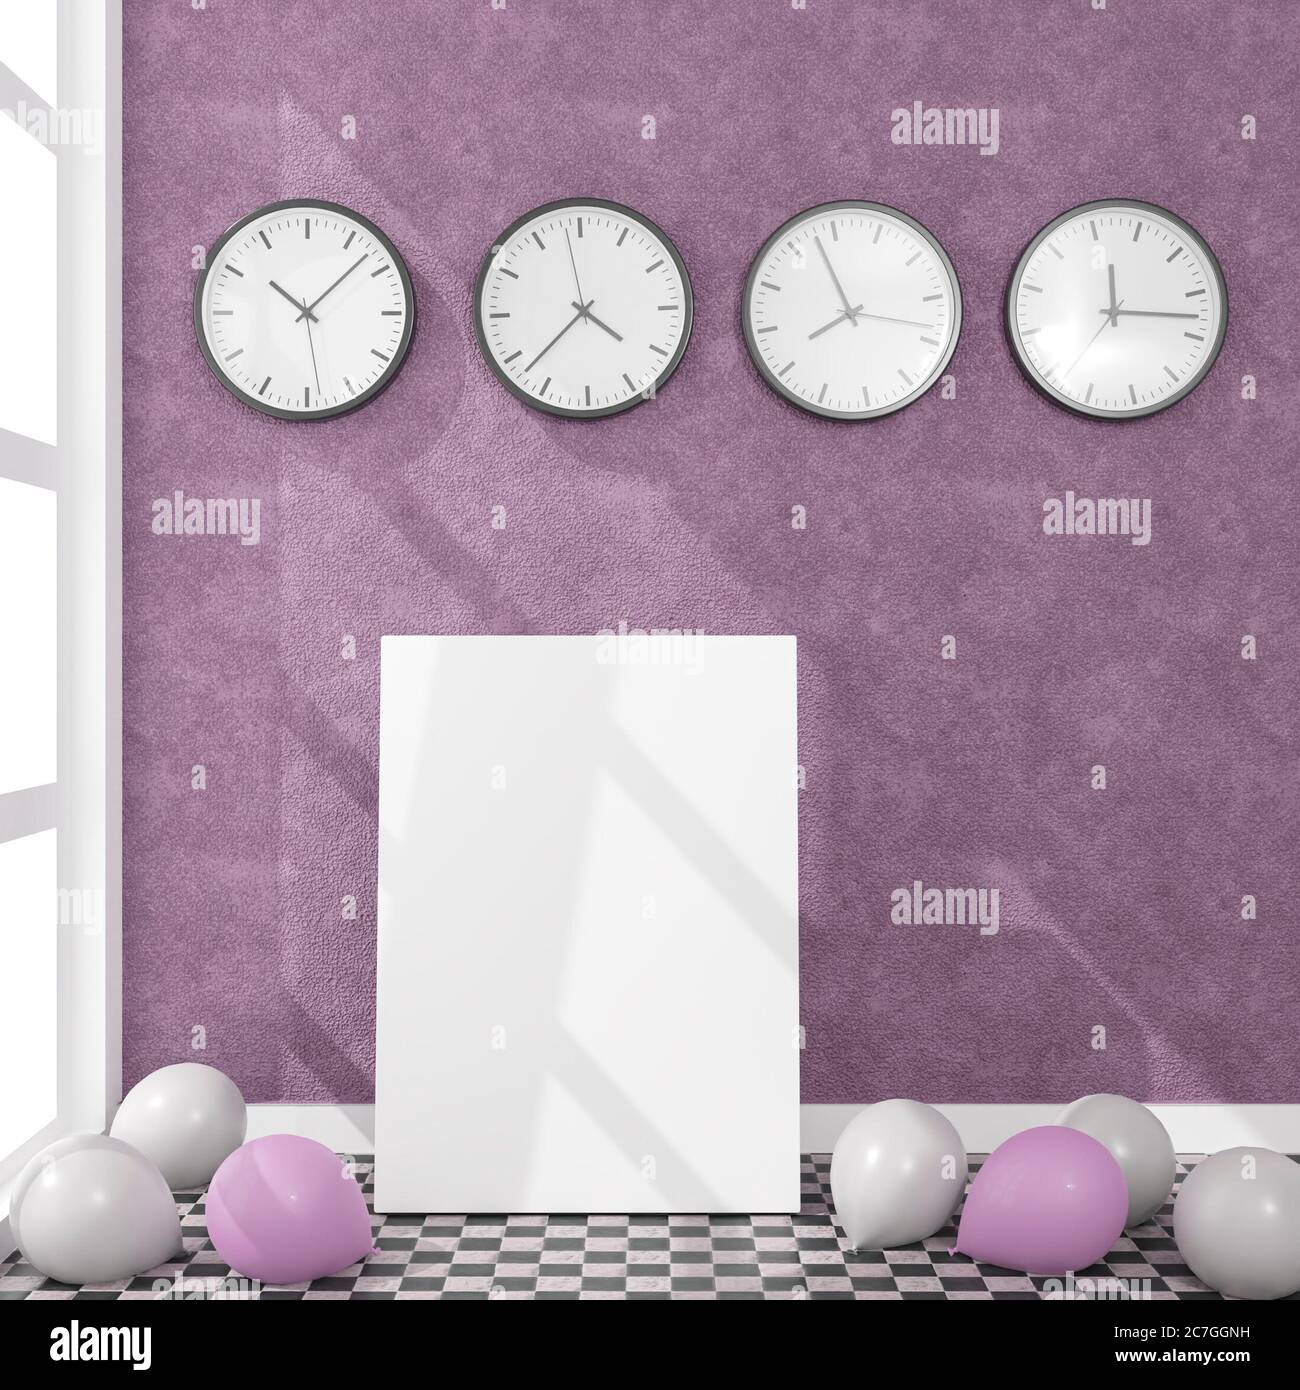 Canvas with some balloons in a daylight room. 3D rendering mockup. 3d illustration.Party concept Stock Photo